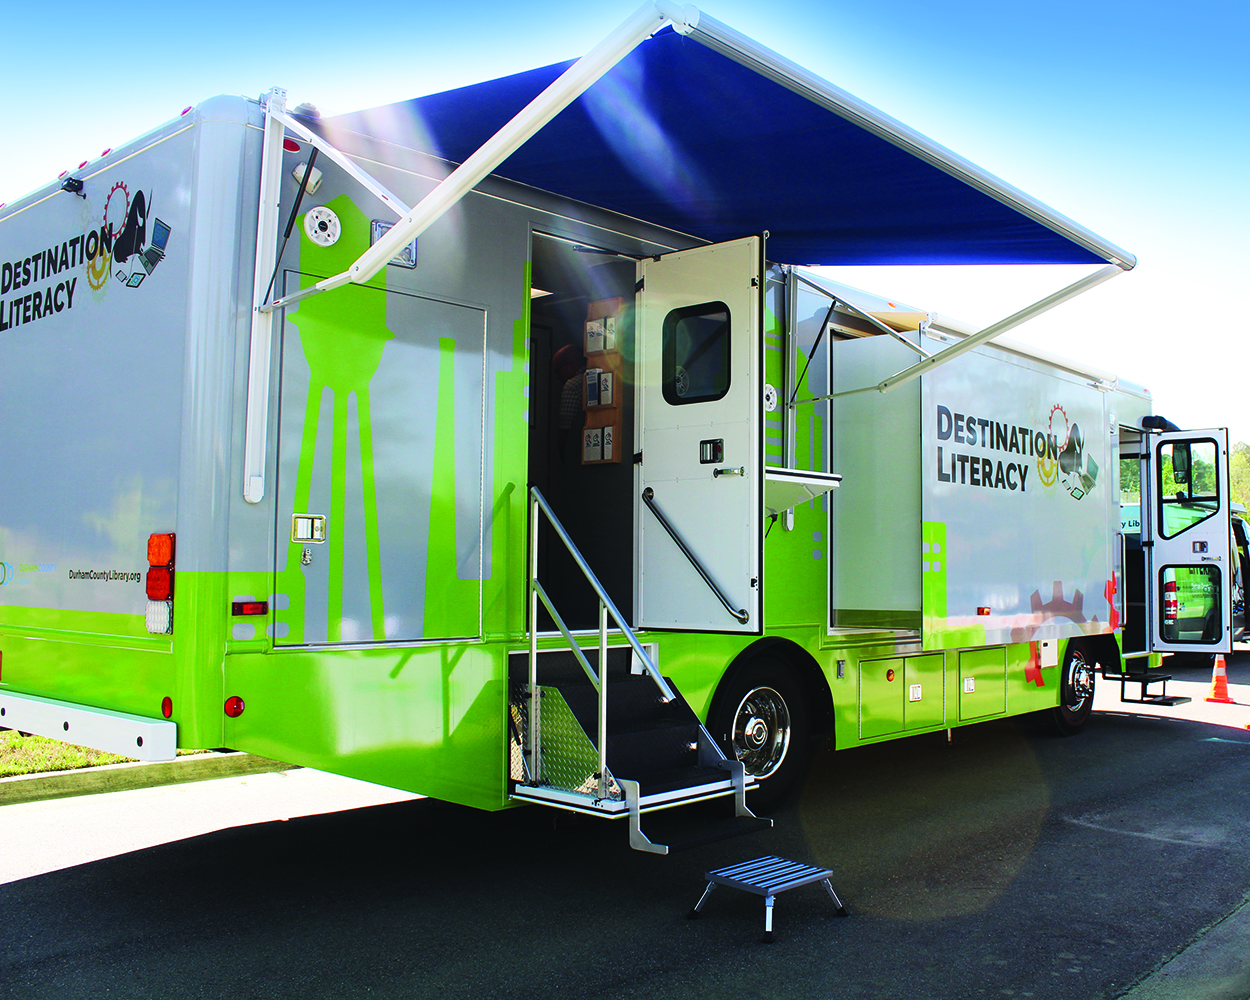 The Tech Mobile: a large vehicle with open doors and extended canopies